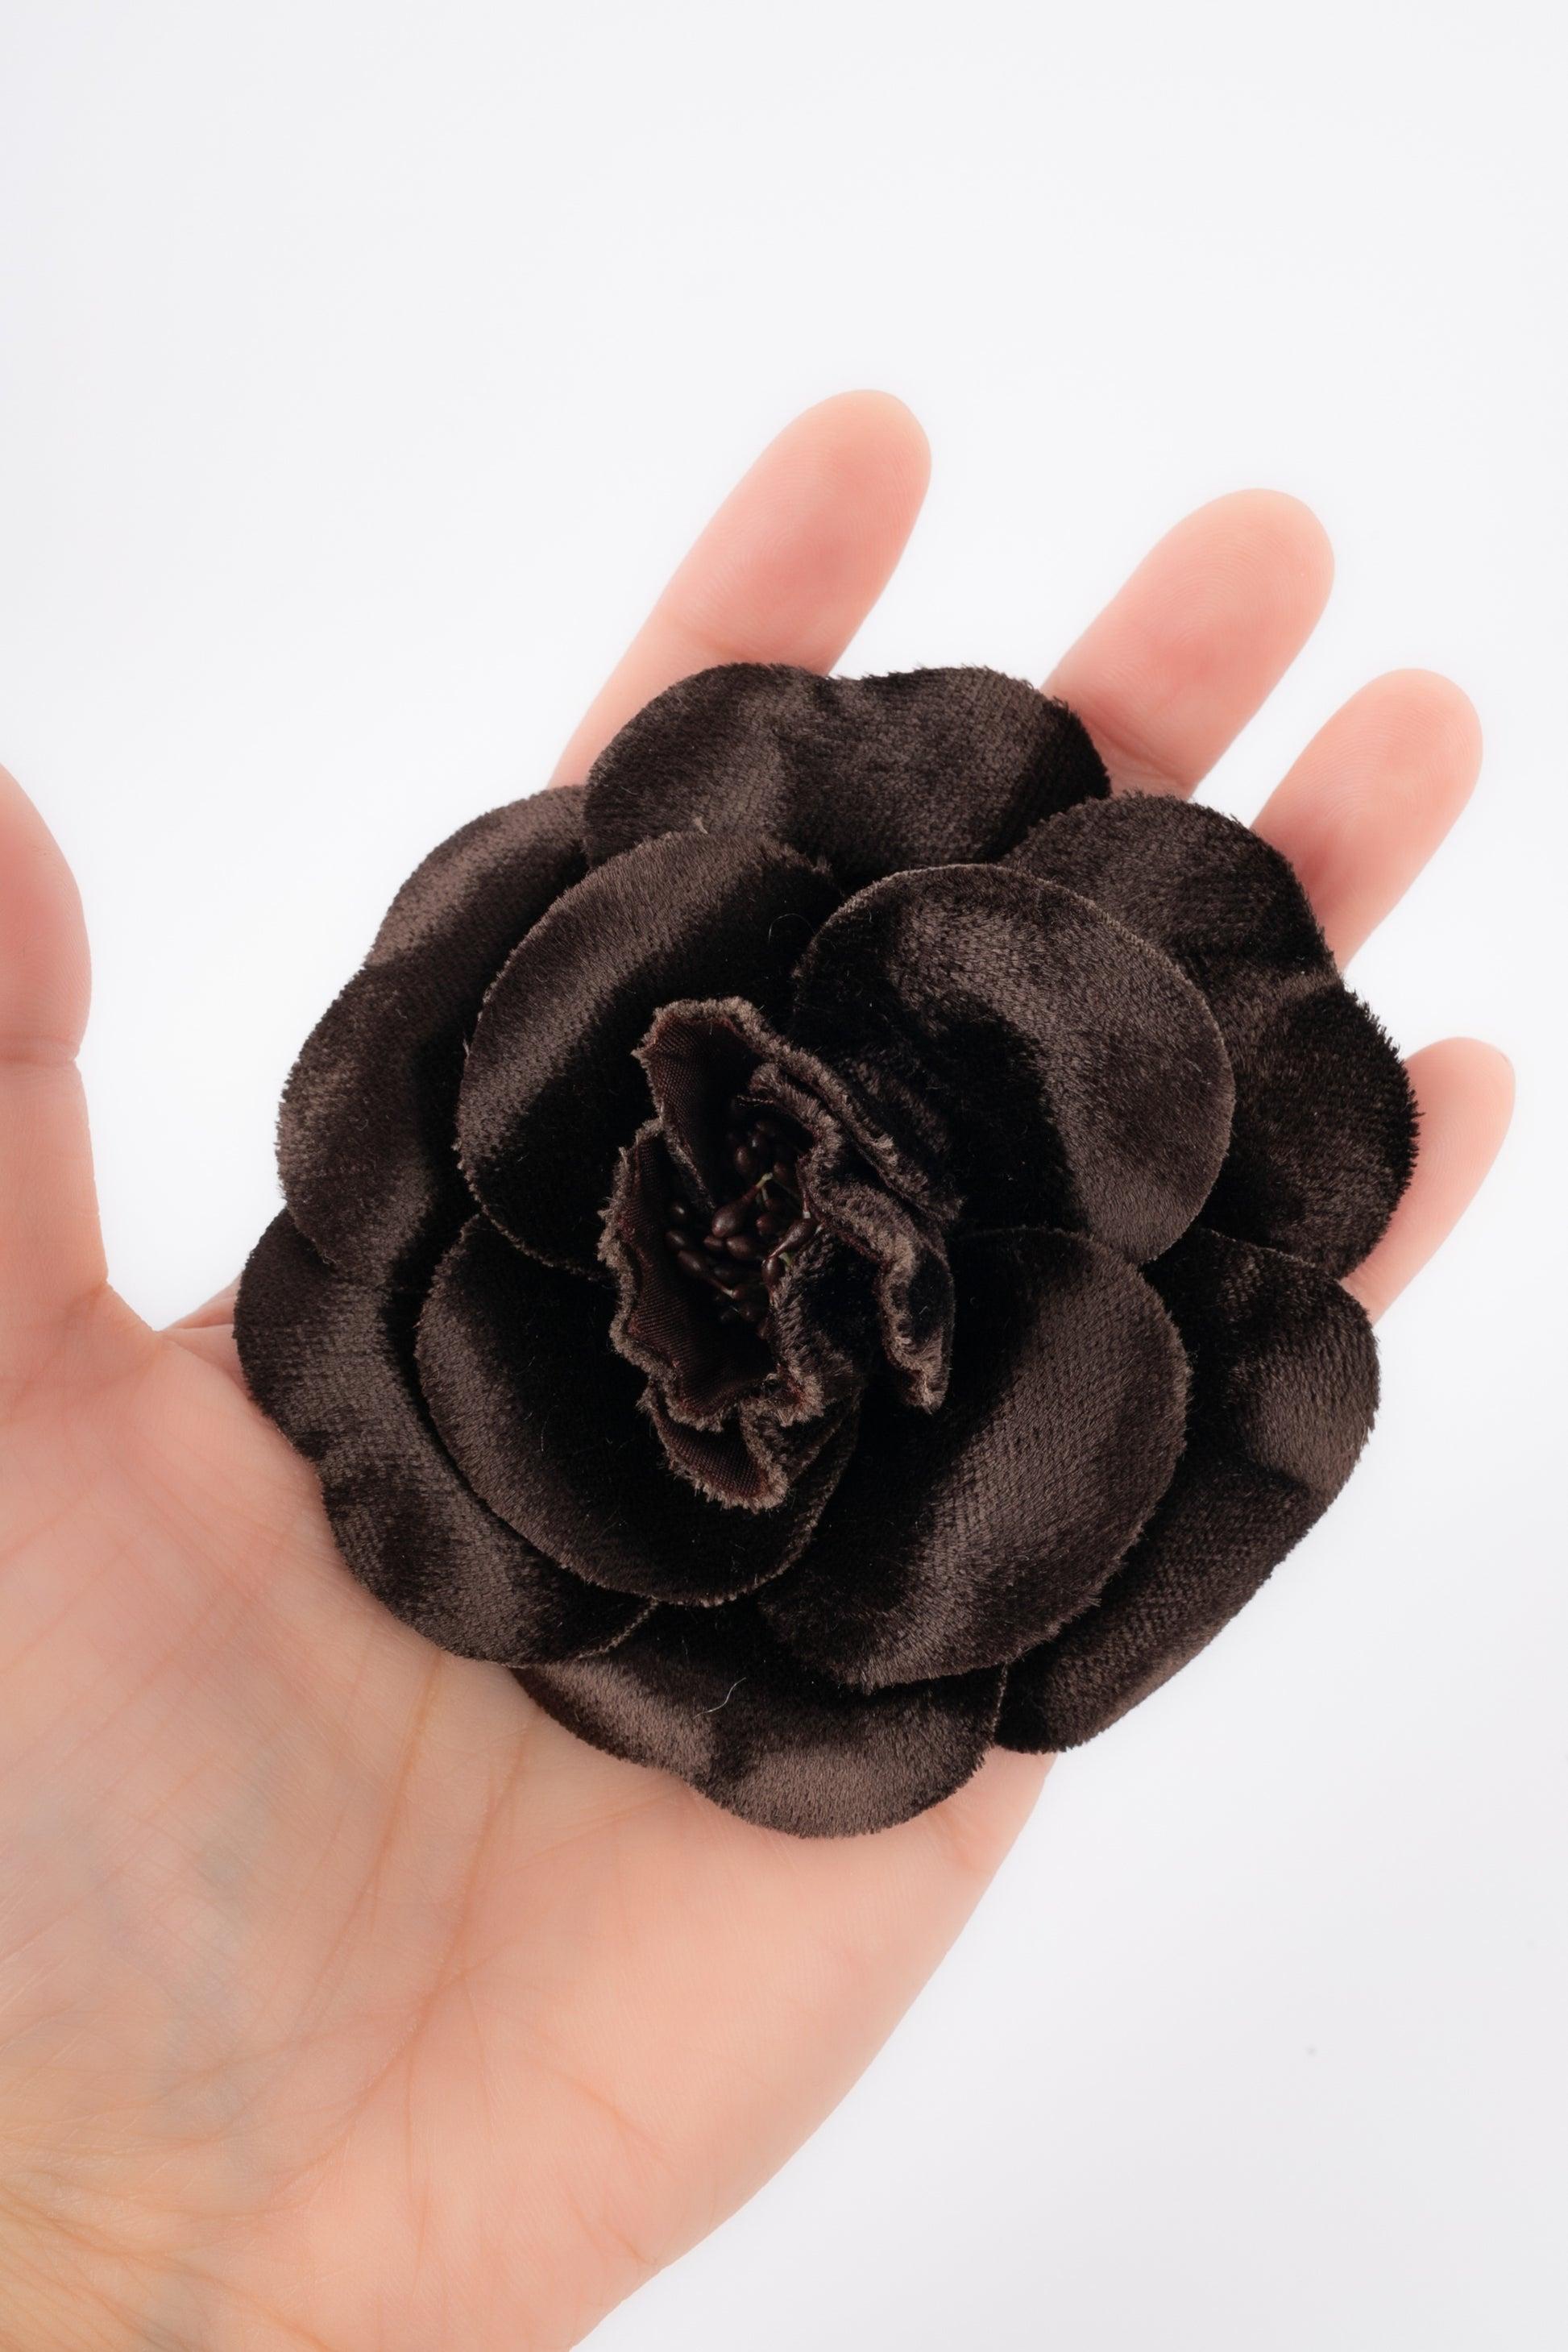 Chanel - Brown velvet camellia brooch. Not signed on the back.

Additional information: 
Condition: Very good condition
Dimensions: Diameter: 8.5 cm
 
Seller Reference: BRB9